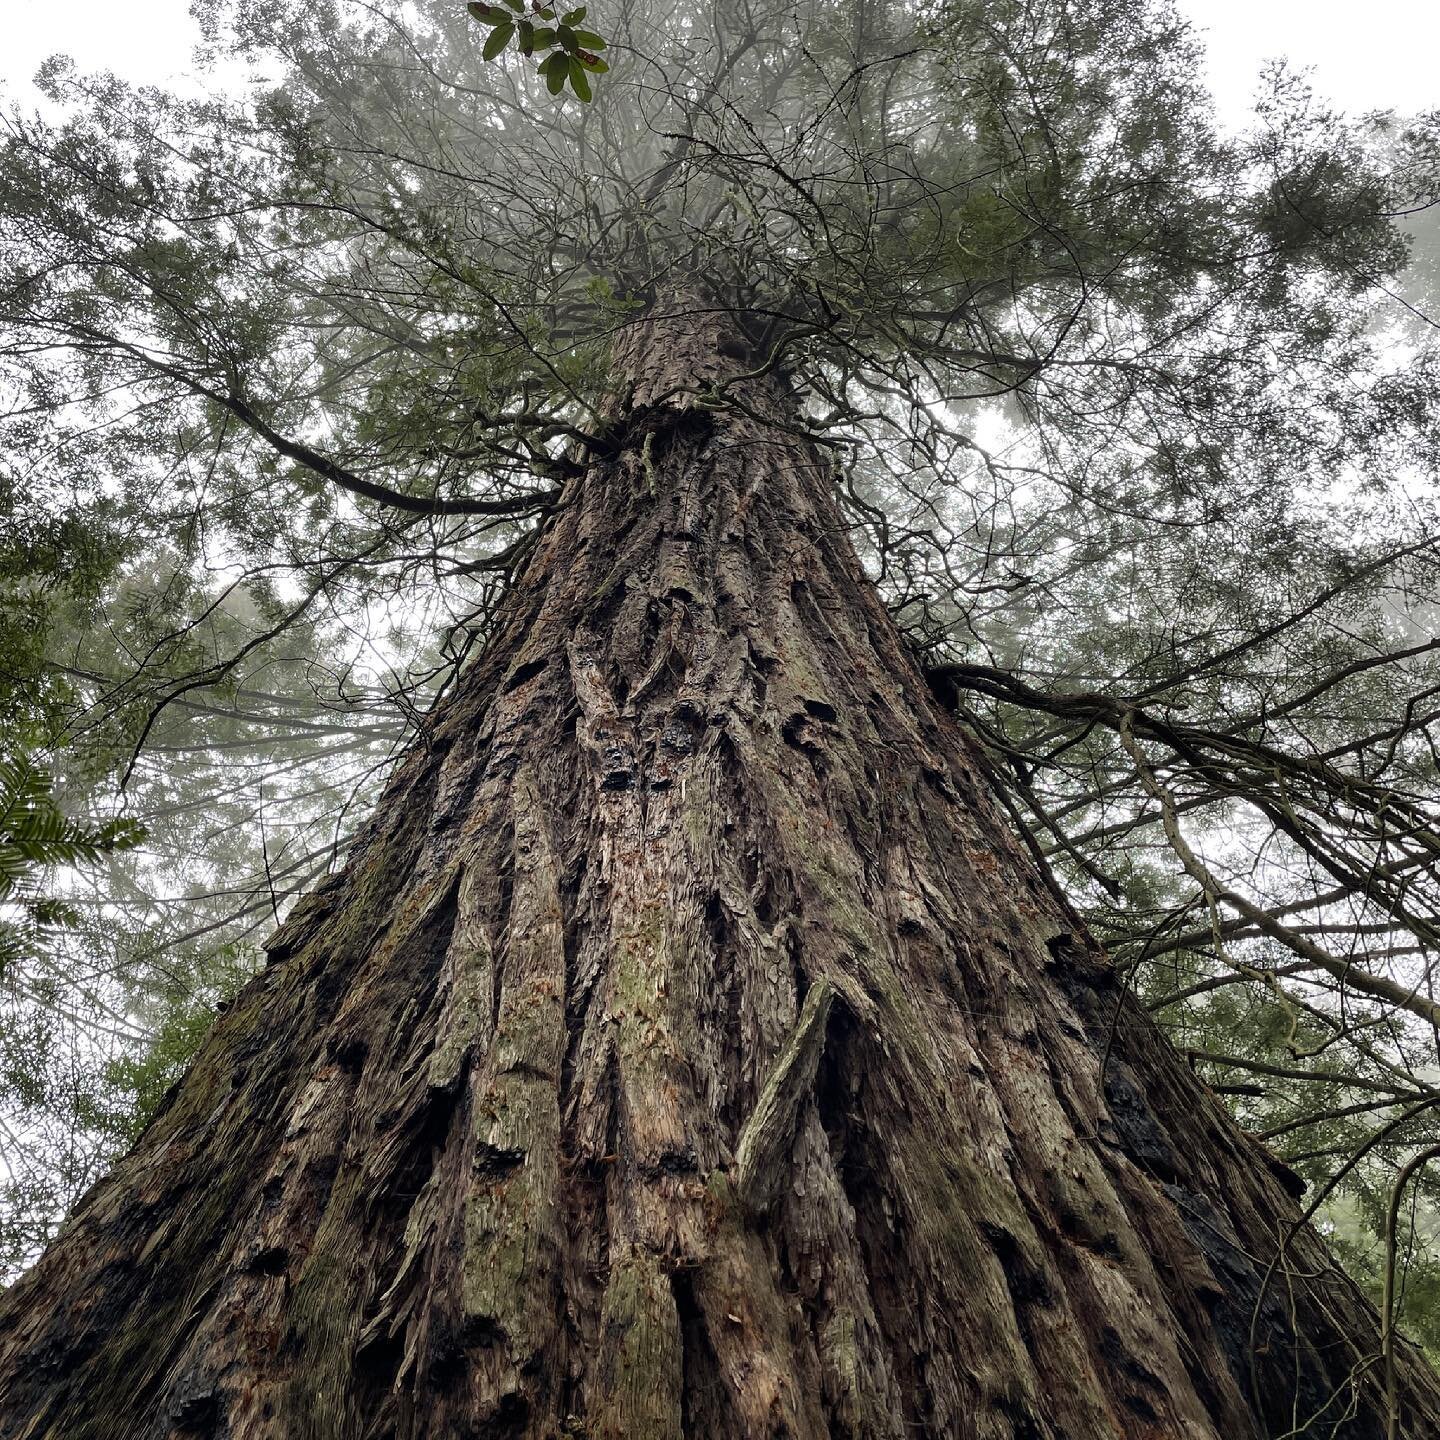 Delay # 8.  Cal Fire has once again postponed making a decision to approve the Silver Estates logging plan near Guerneville. The plan is clearly flawed. Cal Fire: stop trying to fix this plan for your friends in the timber industry. 86 the plan now! 